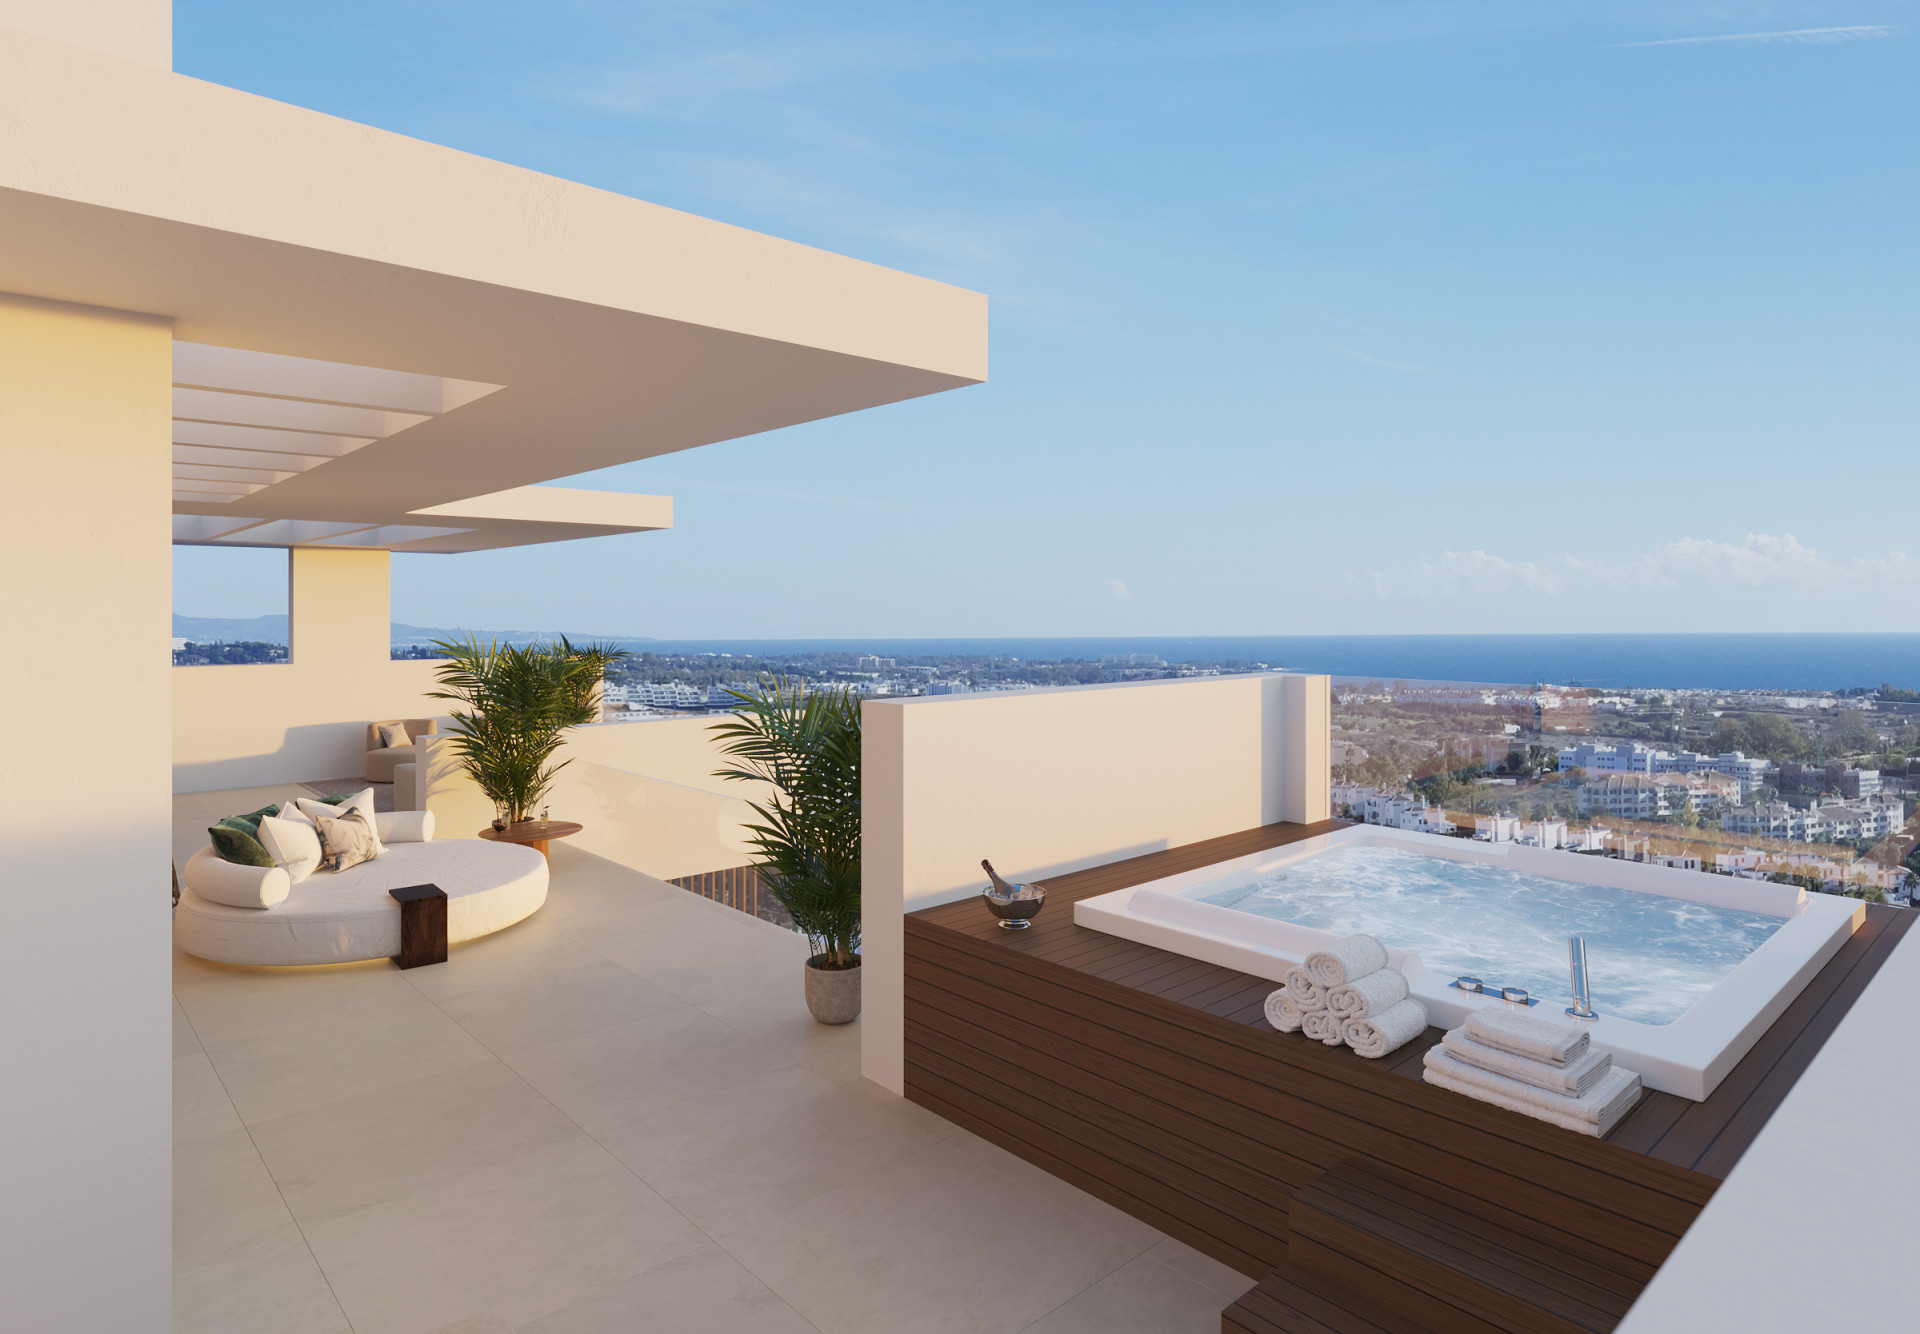 Exclusive new development that comprises a collection of twelve exclusive villas boasting contemporary aesthetics and spectacular views